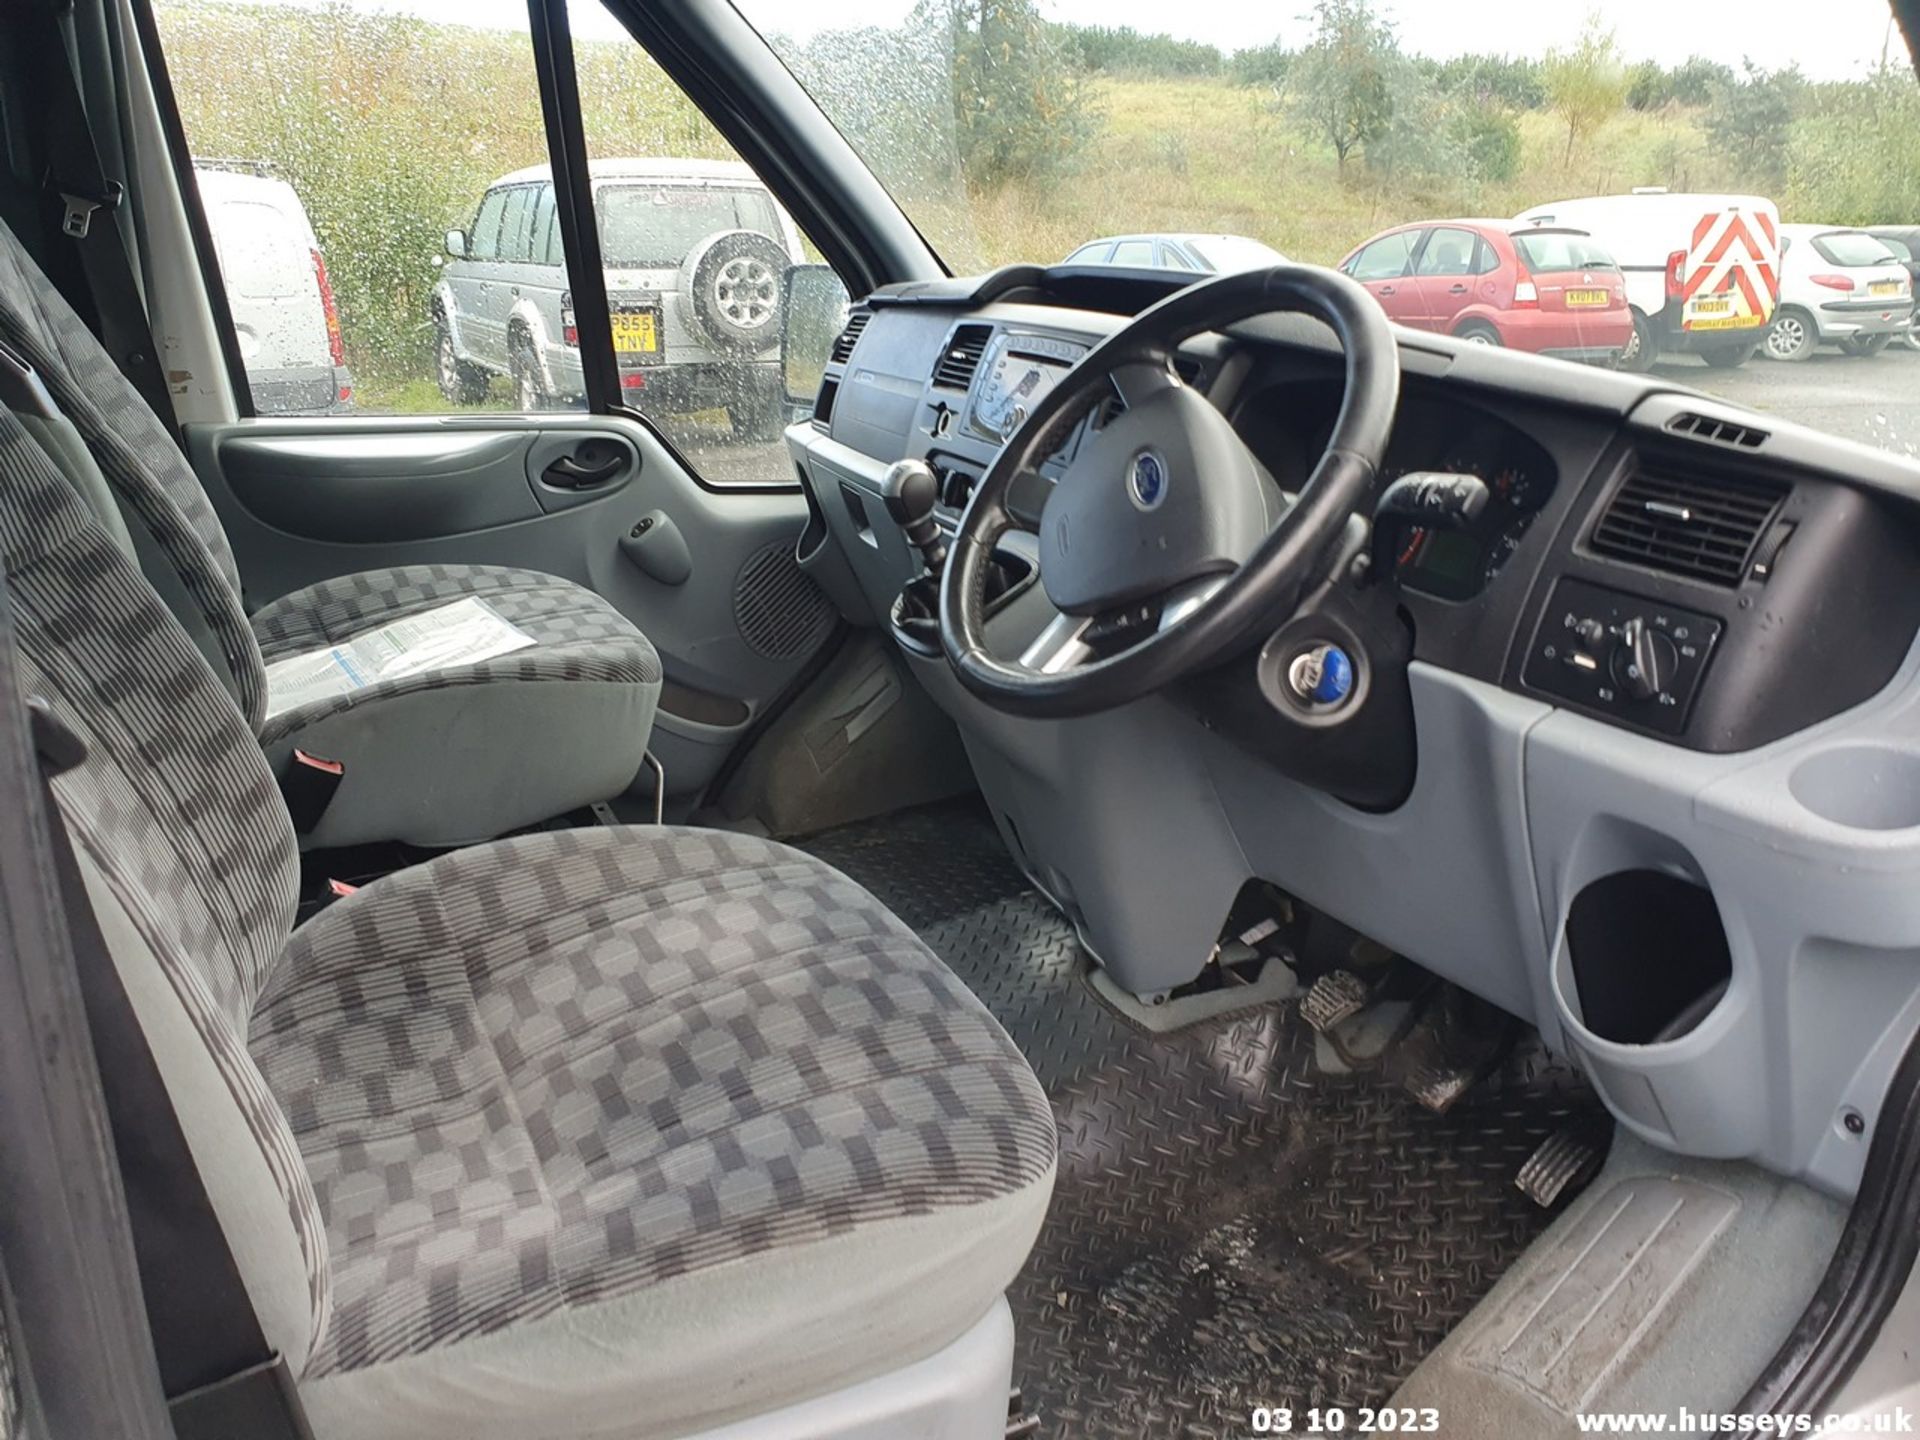 13/62 FORD TRANSIT 125 T280 FWD - 2198cc 5dr MPV (Silver, 146k) - Image 53 of 65